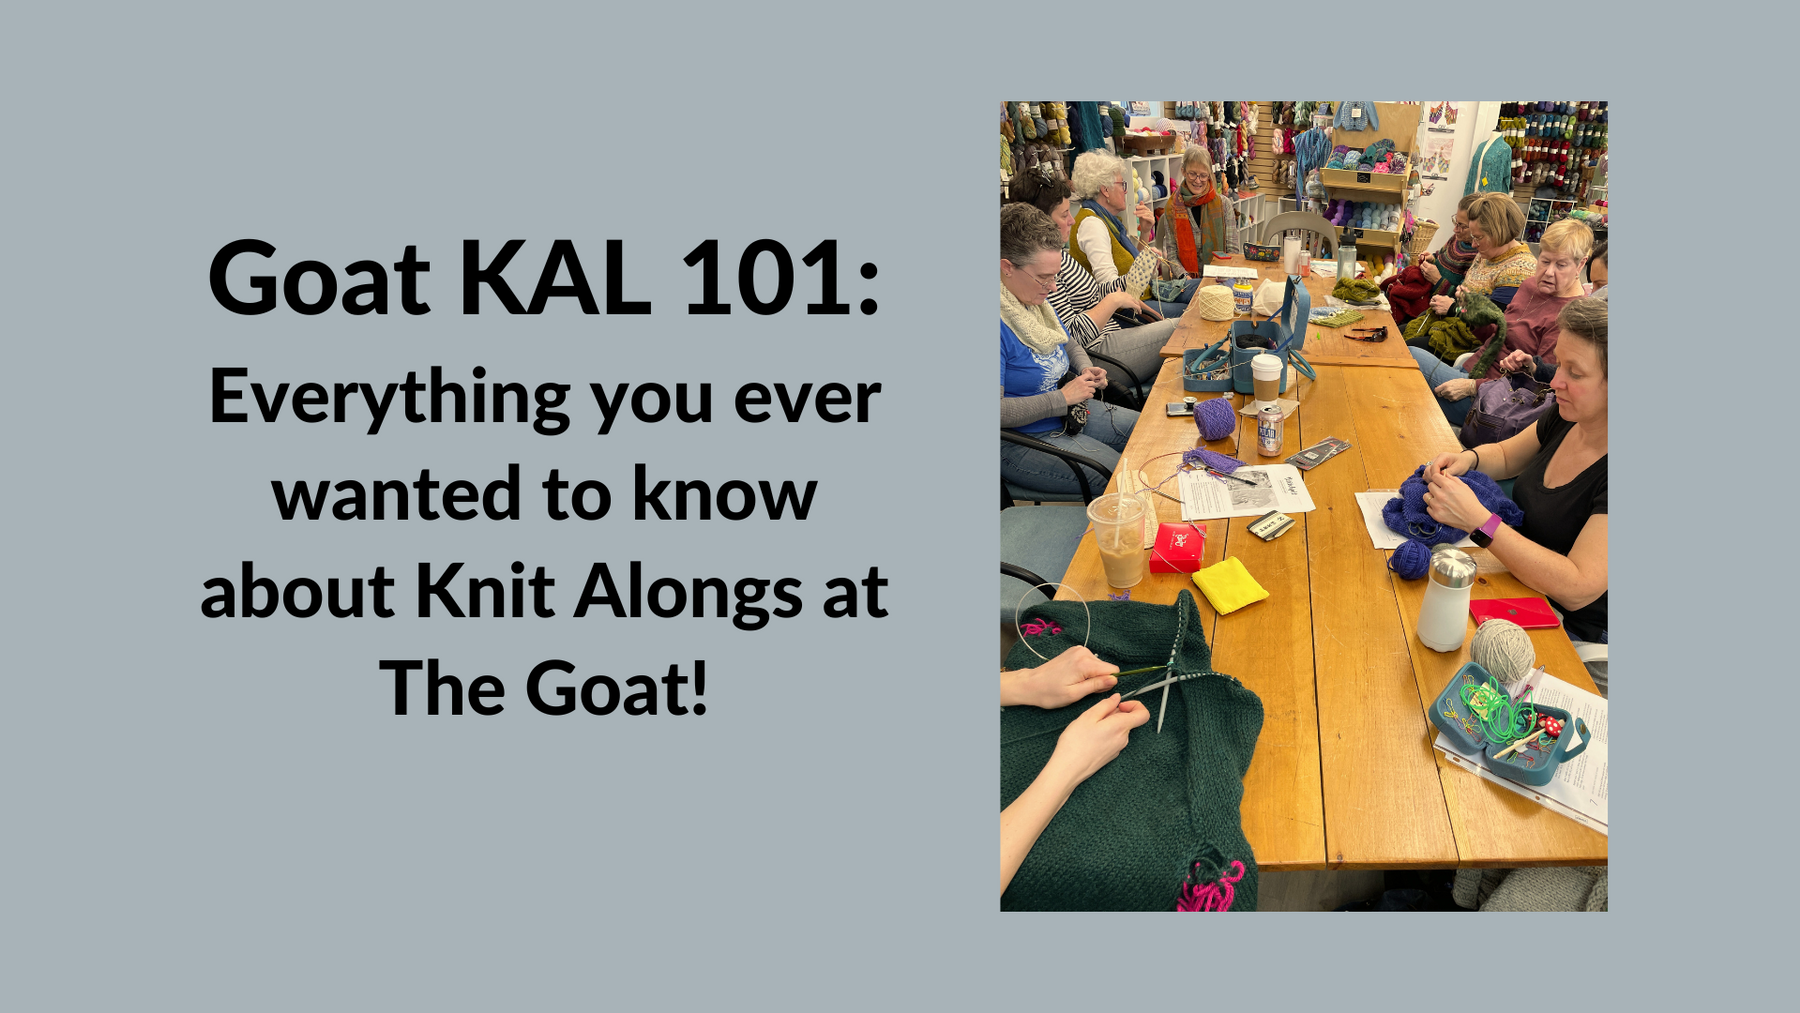 Goat KAL 101: Everything you ever wanted to know about Knit Alongs at The Goat!